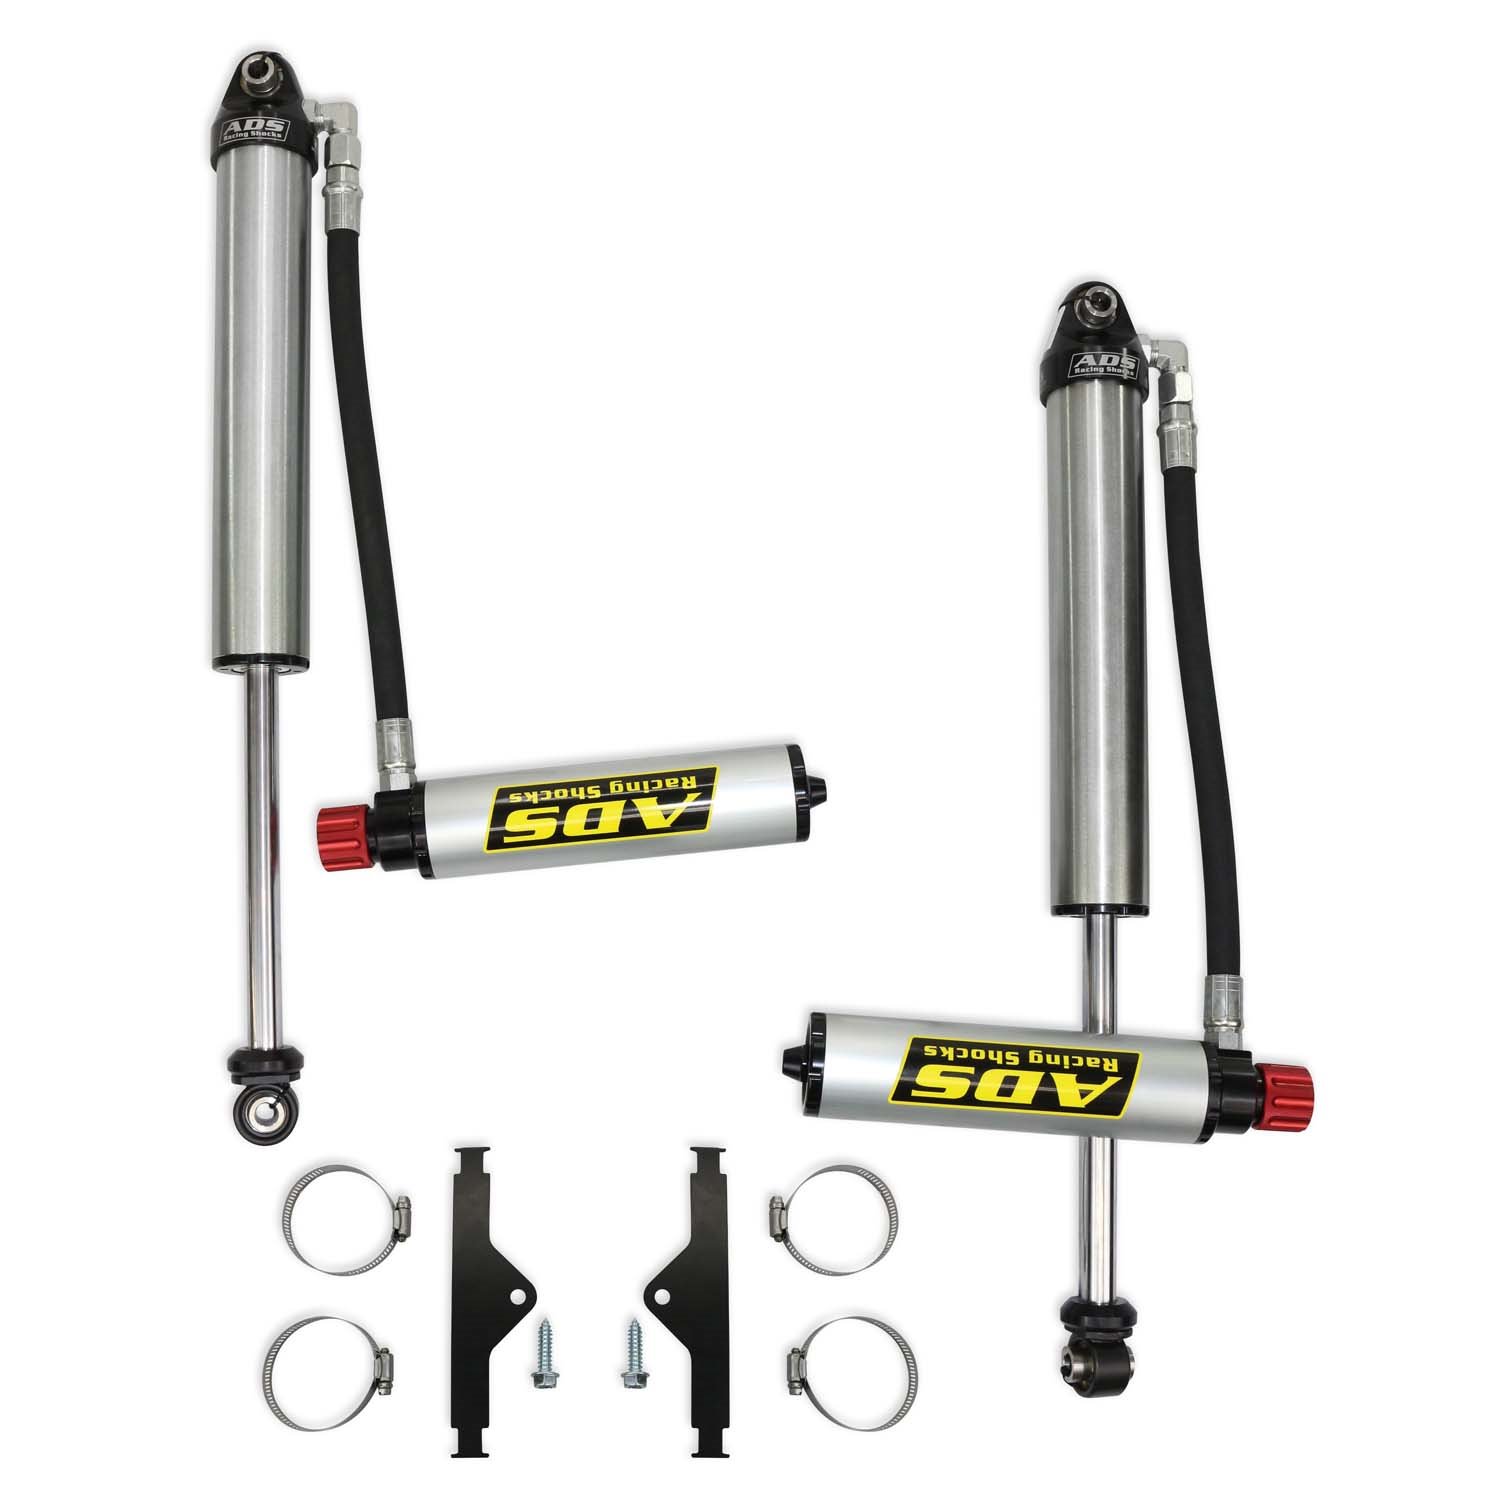 250-200SR-A00 Racing Bolt-On Shocks, Fits Select Toyota Land Cruiser, 2.5 in., 200 Series w/ Remote Clicker Reservoir